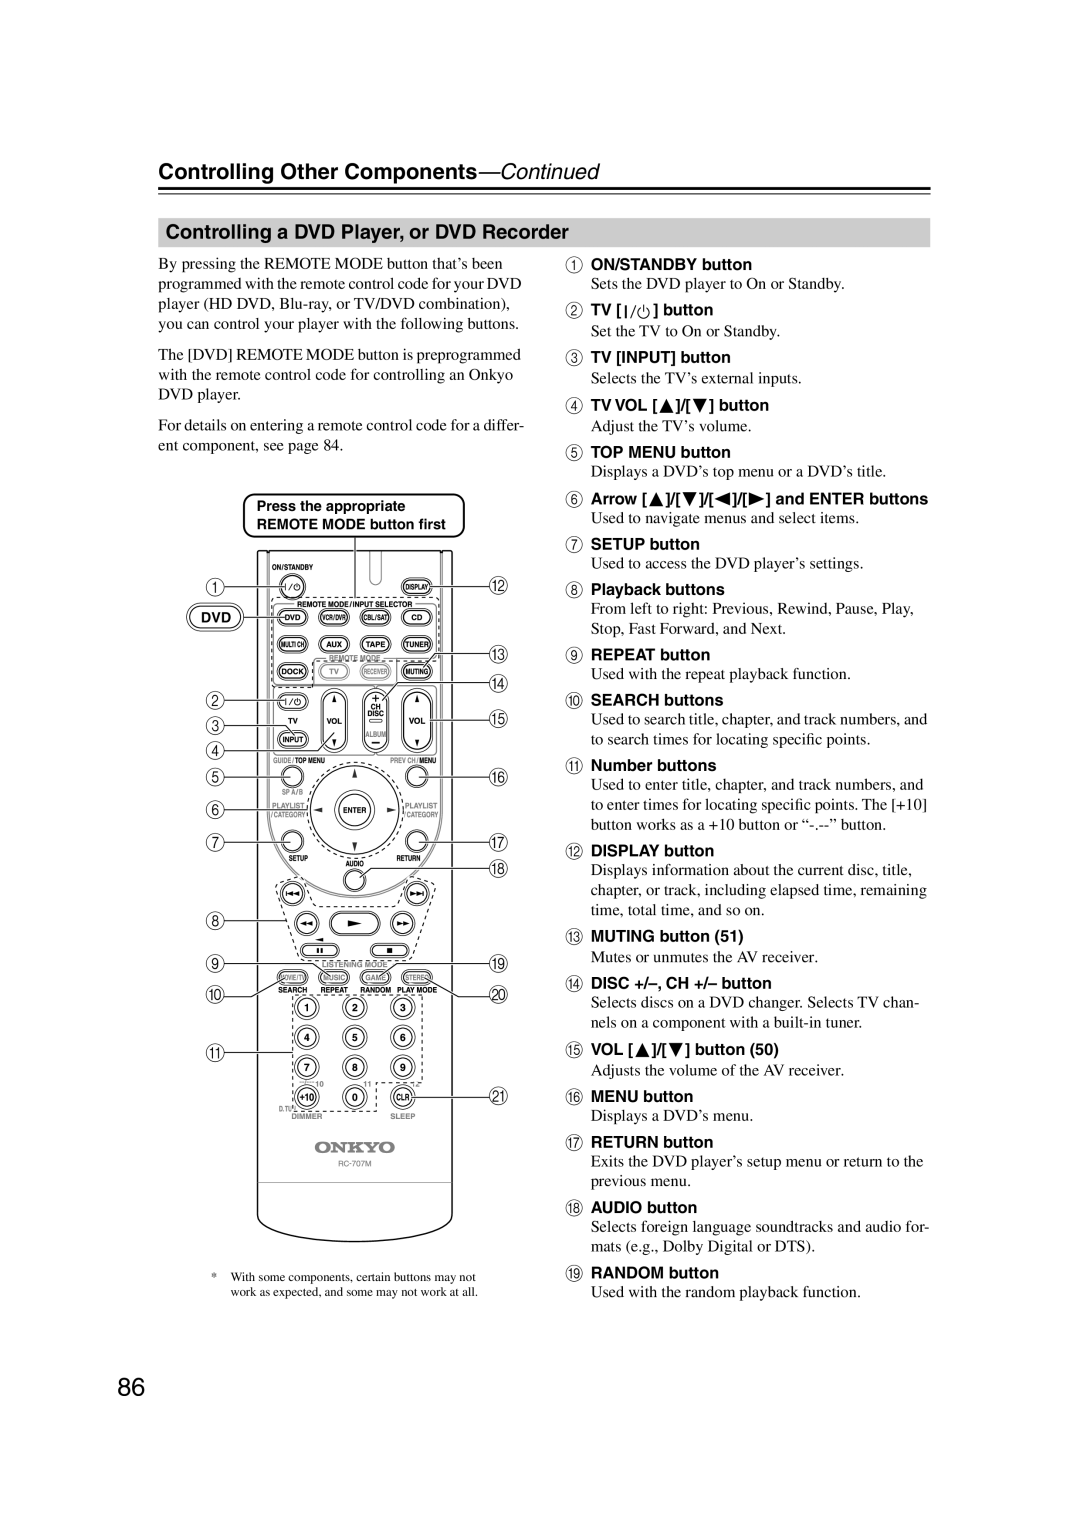 Onkyo HT-S6100 instruction manual Controlling a DVD Player, or DVD Recorder, Controlling Other Components-Continued 